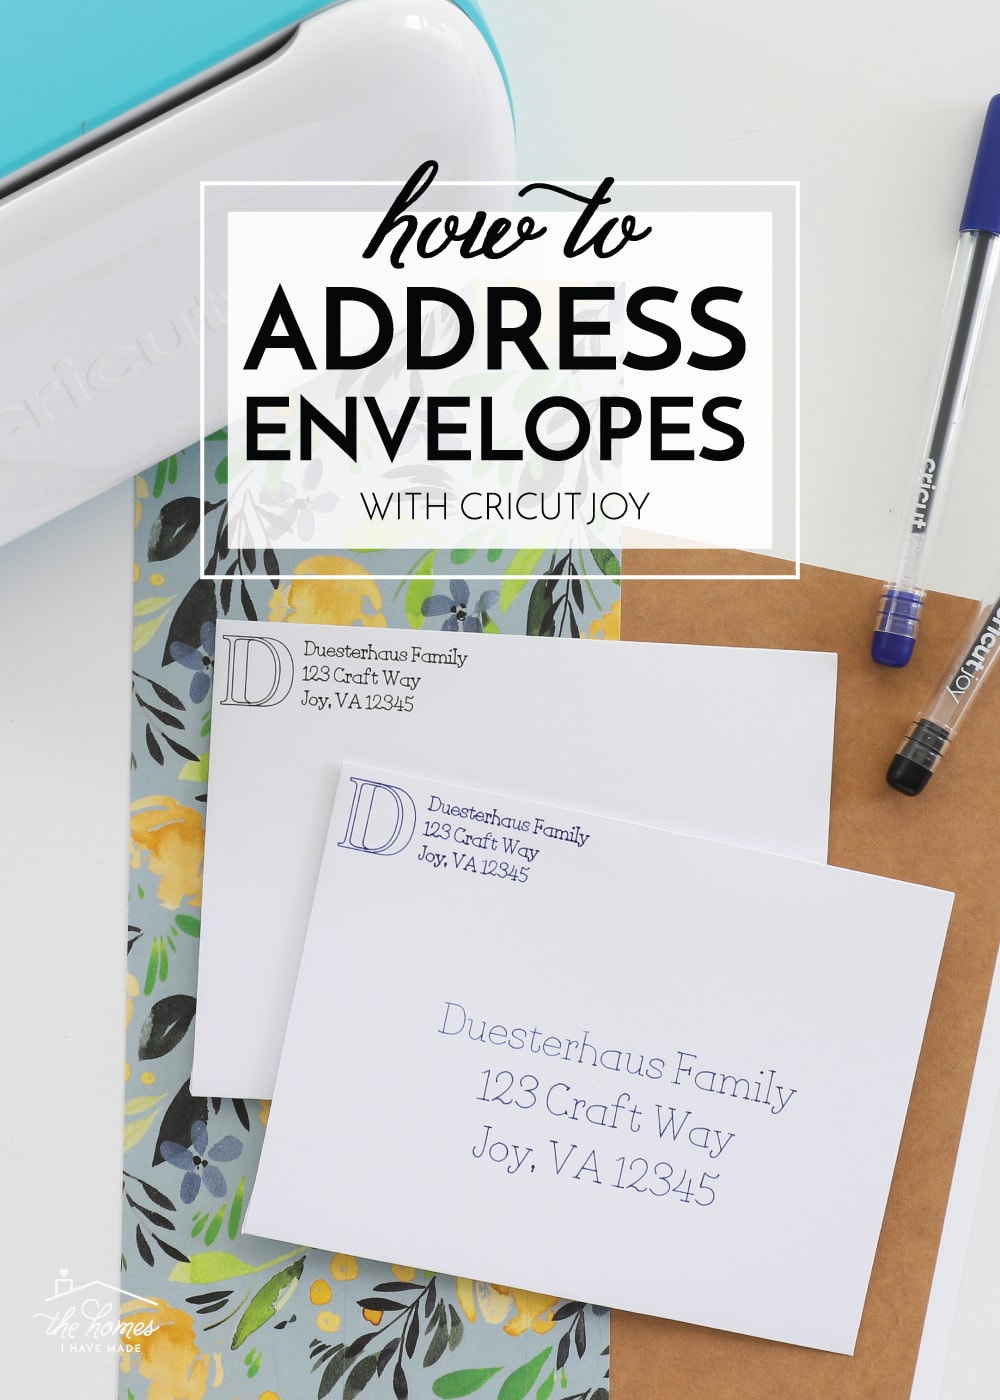 Addressed envelopes, a Cricut Joy machine, and craft supplies with text overlay